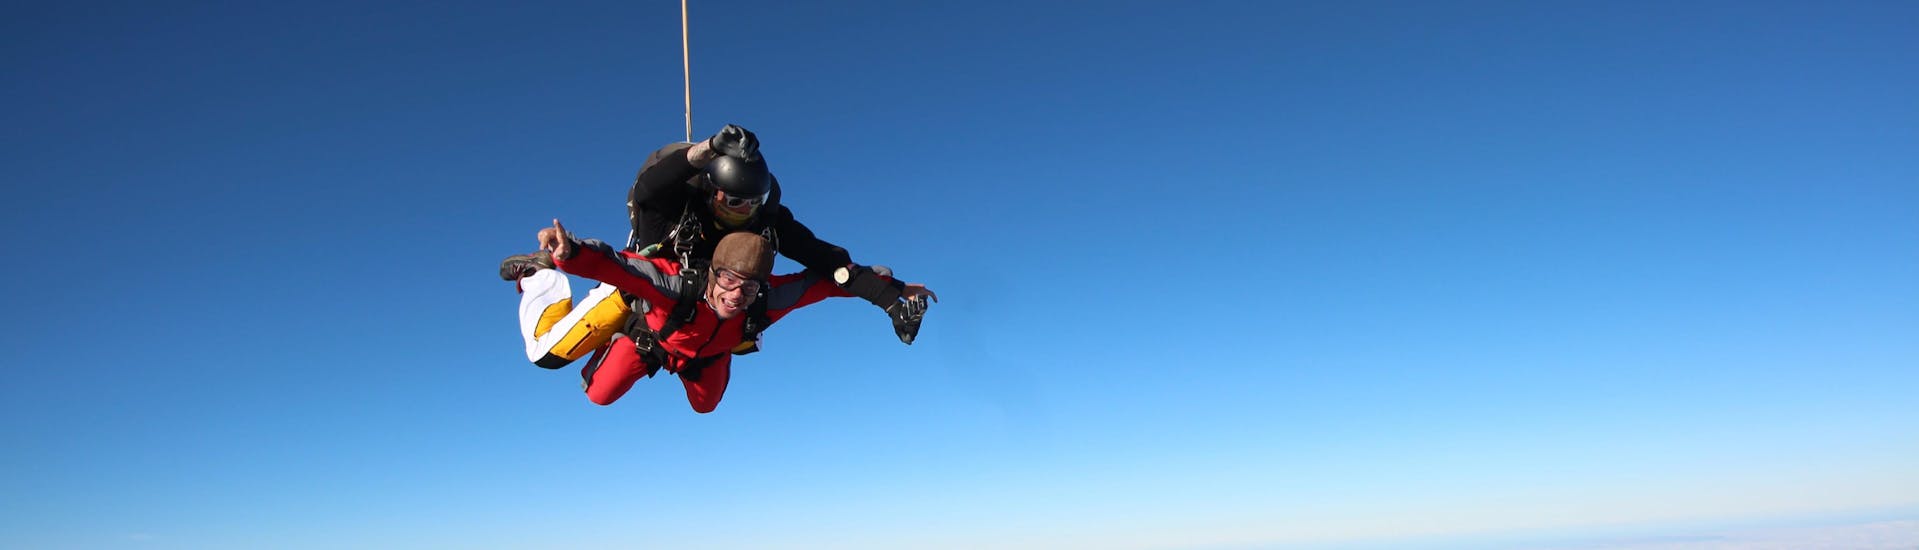 Skydiving in Bay of Islands - 16,500 ft or 20,000 ft.